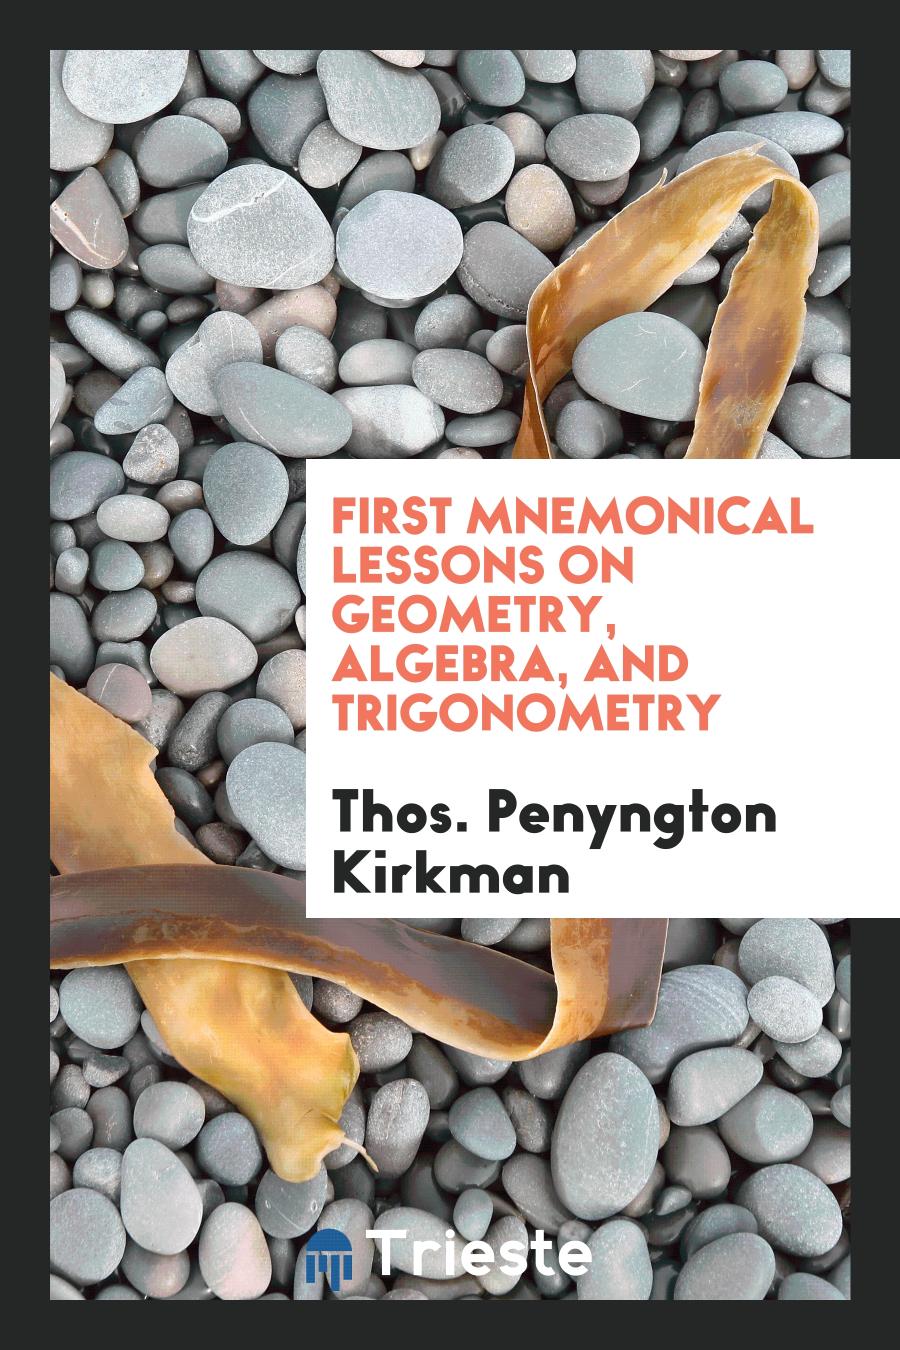 First Mnemonical Lessons on Geometry, Algebra, and Trigonometry